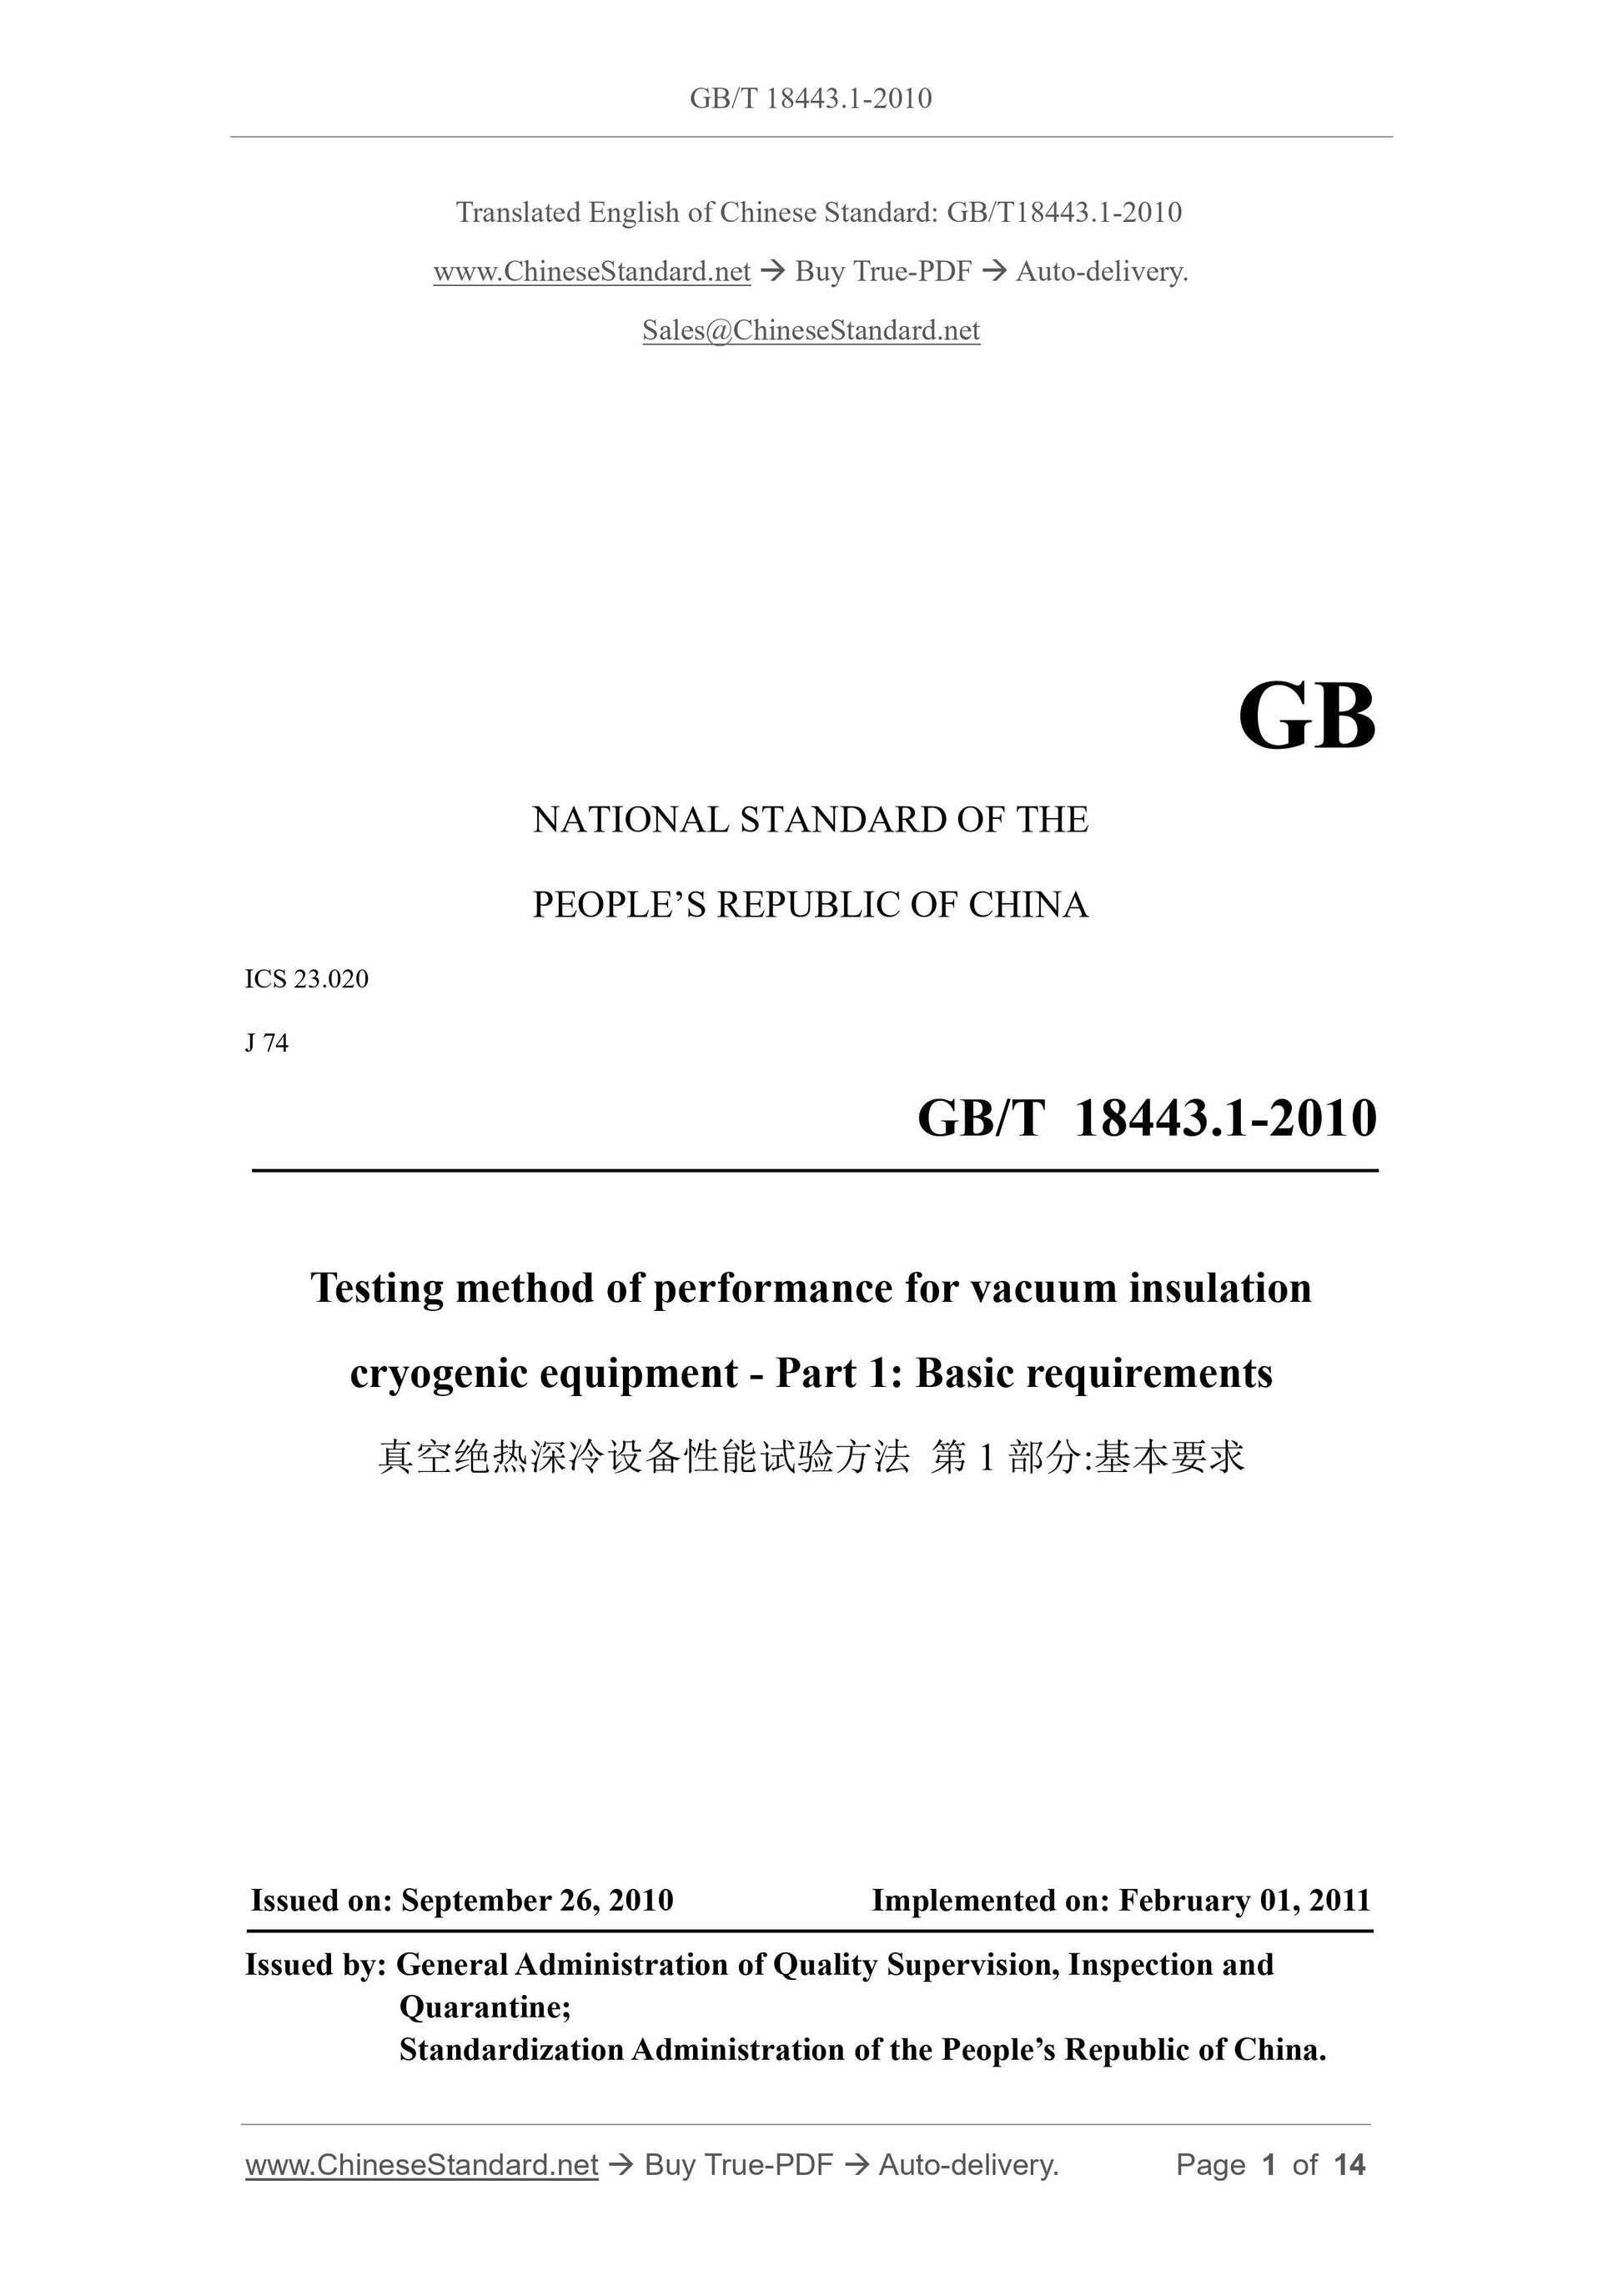 GB/T 18443.1-2010 Page 1